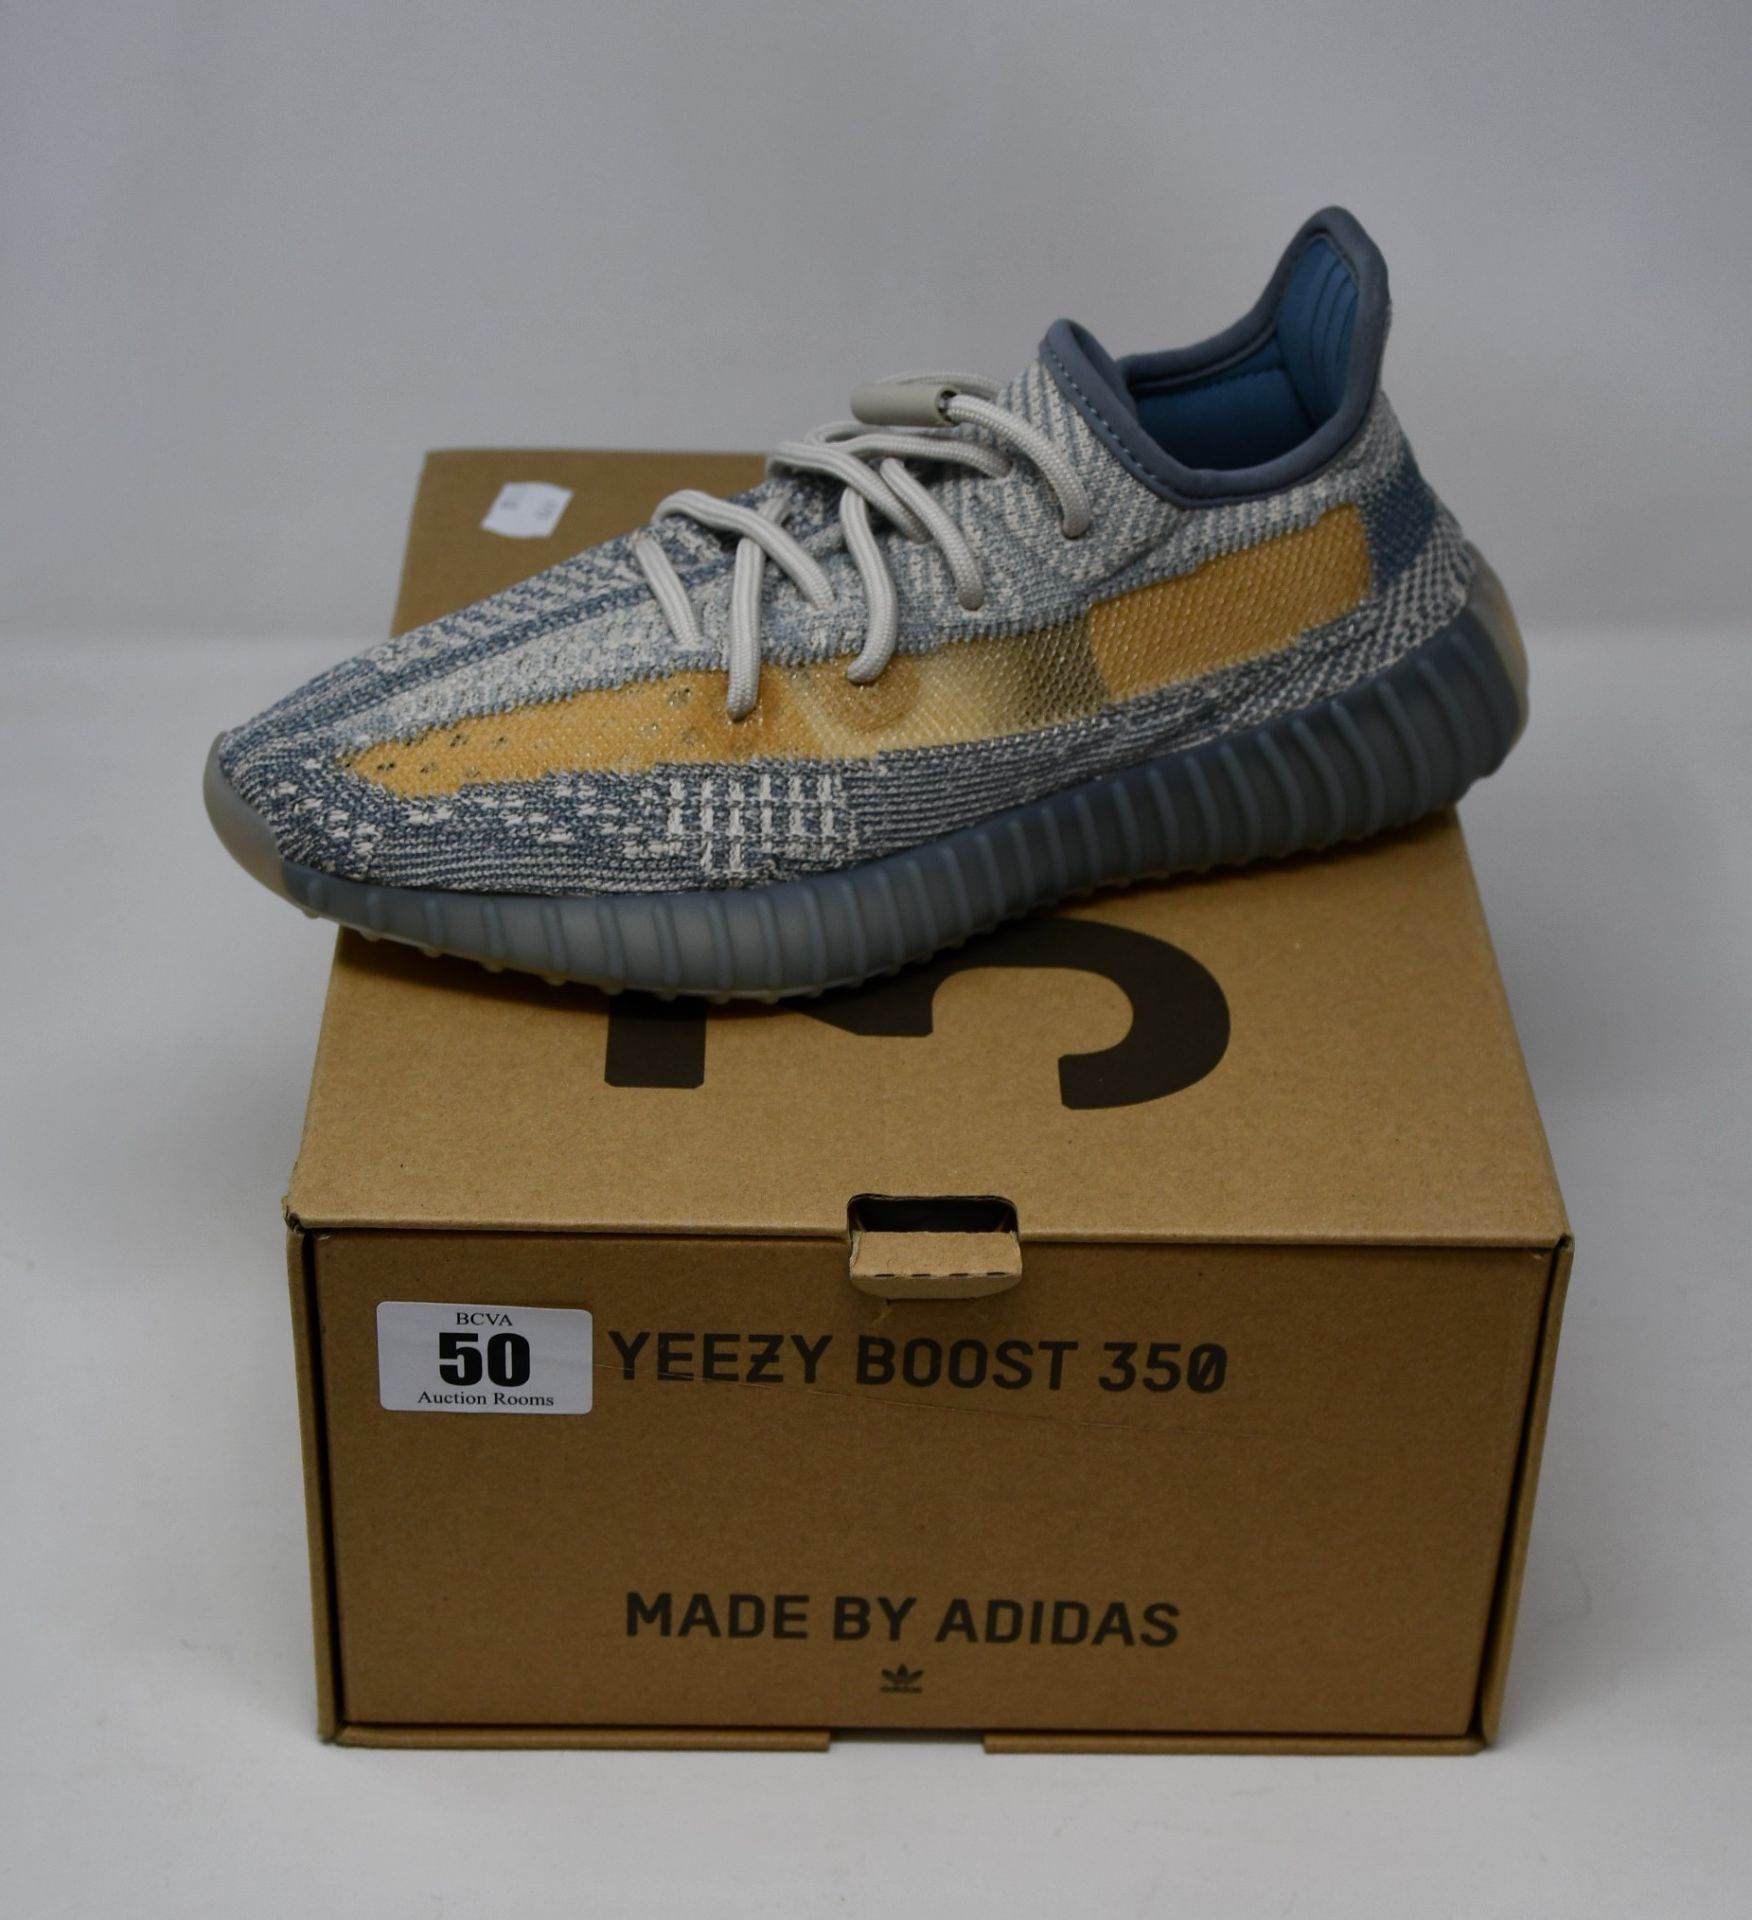 A pair of as new Adidas Yeezy Boost 350 V2 trainers (UK 5).